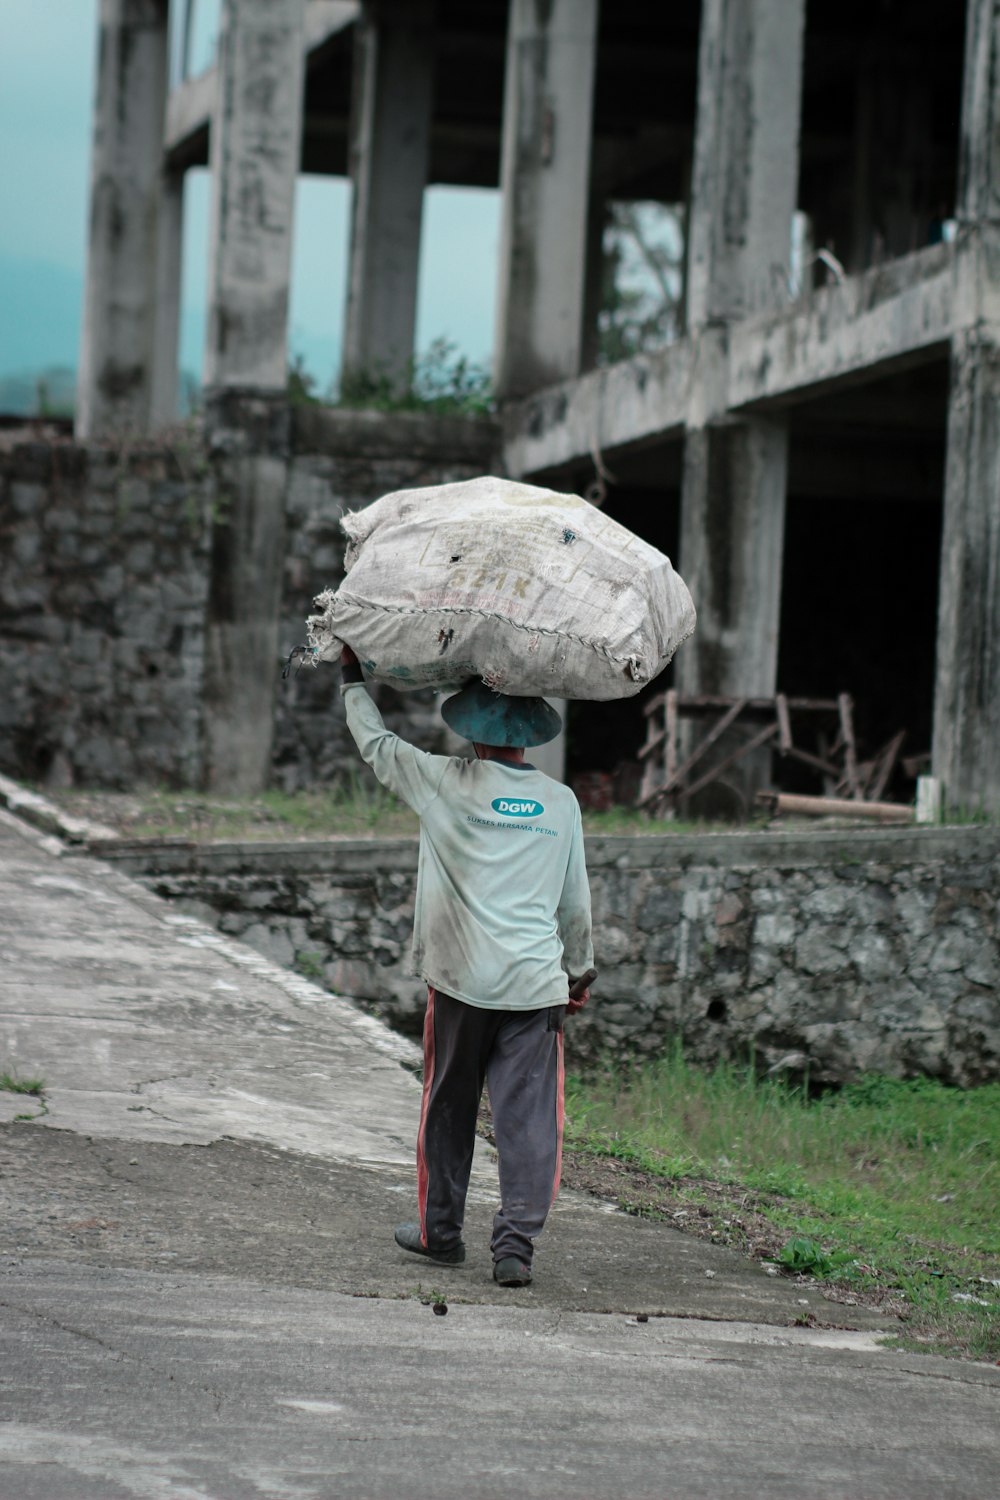 a person carrying a large load